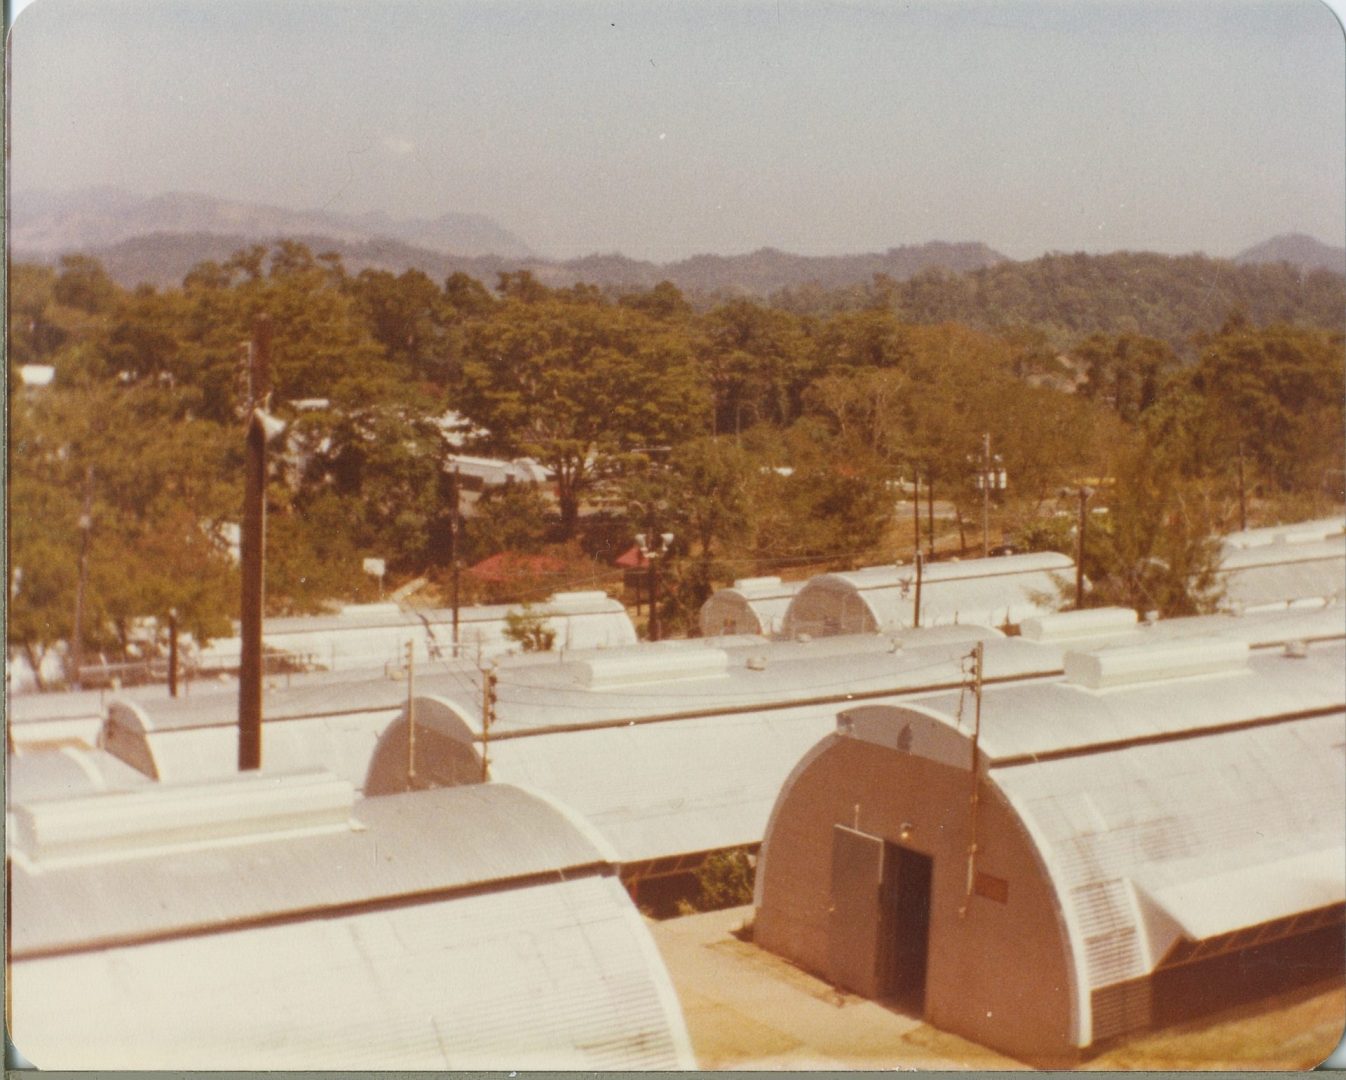 Upper MAU Camp 1981 Courtesy of mtfrazier on flickr